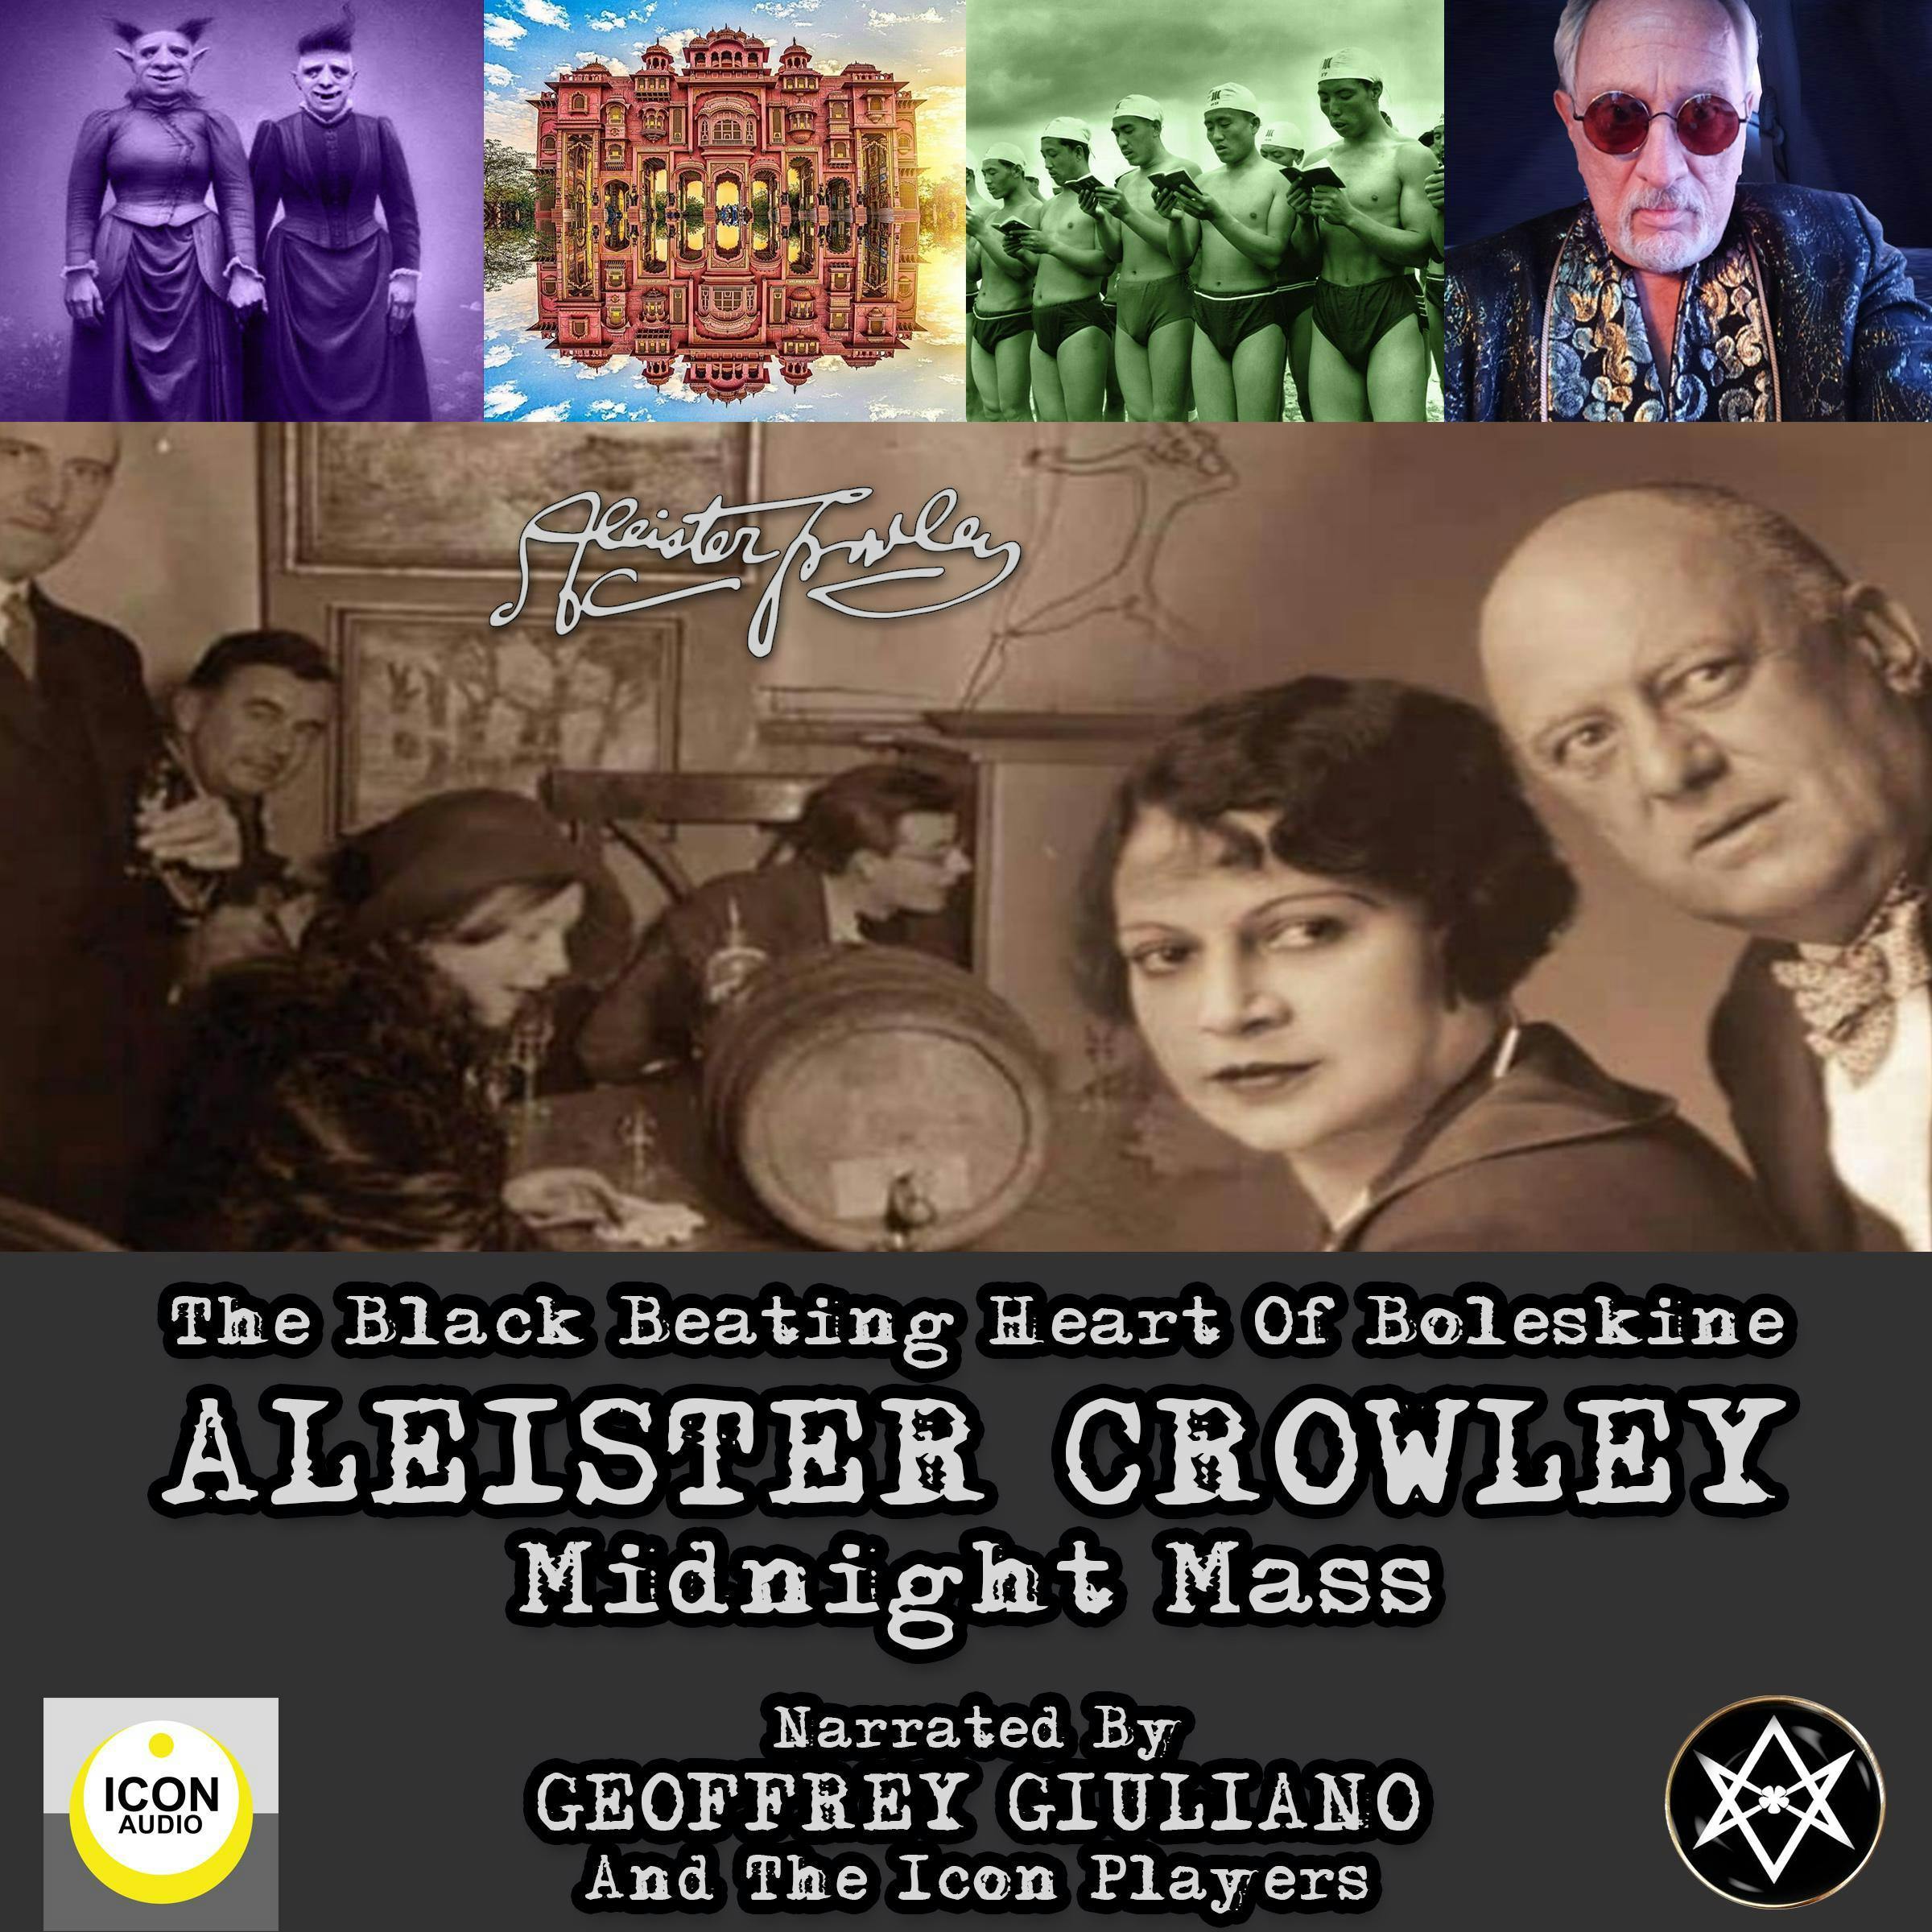 The Black Beating Heart Of Boleskine Aleister Crowley Midnight Mass - Aleister Crowley